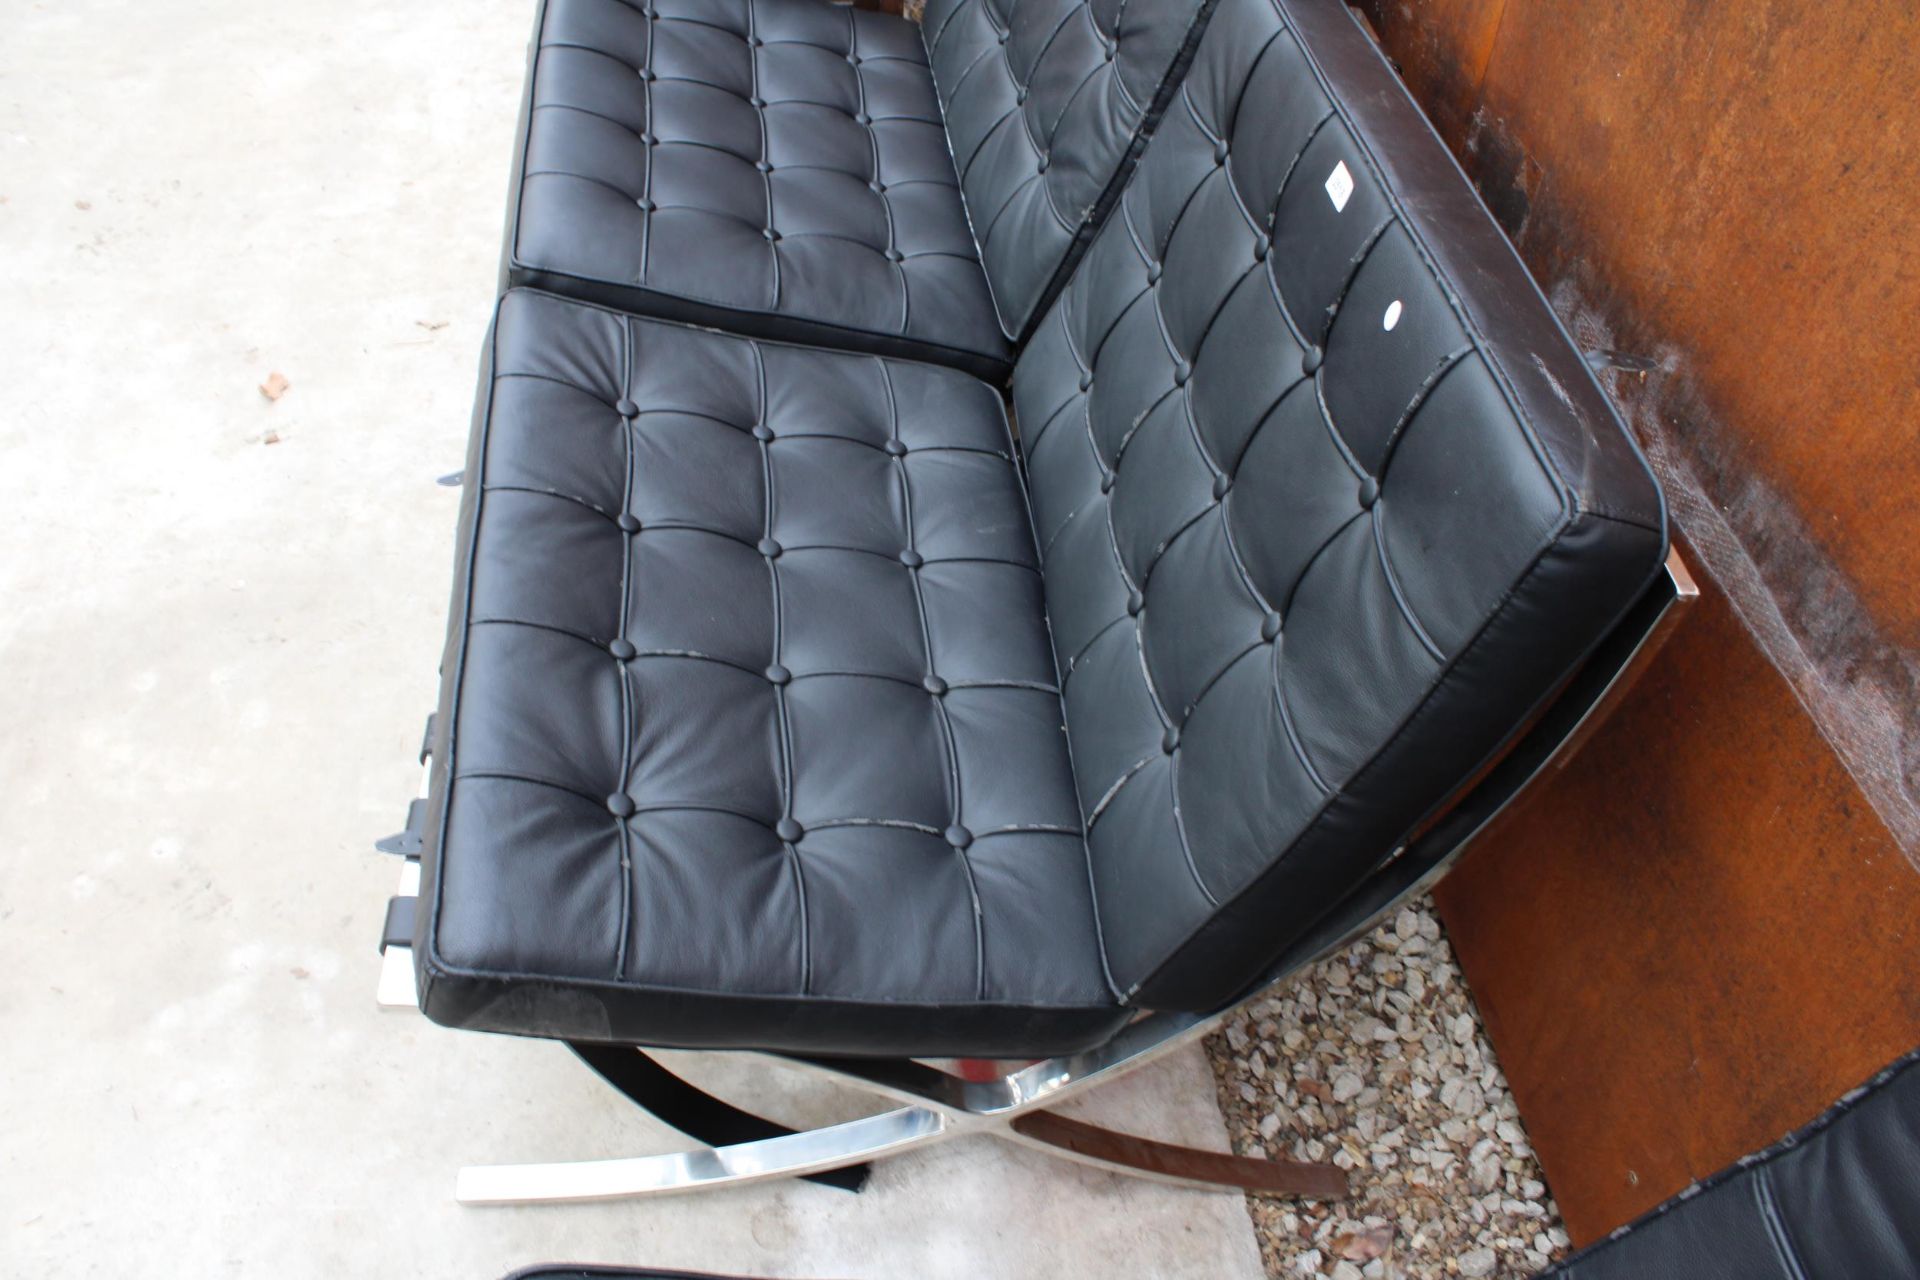 A PAIR OF BLACK BARCELONA STYLE CHAIRS ON POLISHED CHROME X FRAME LEGS - Image 2 of 2